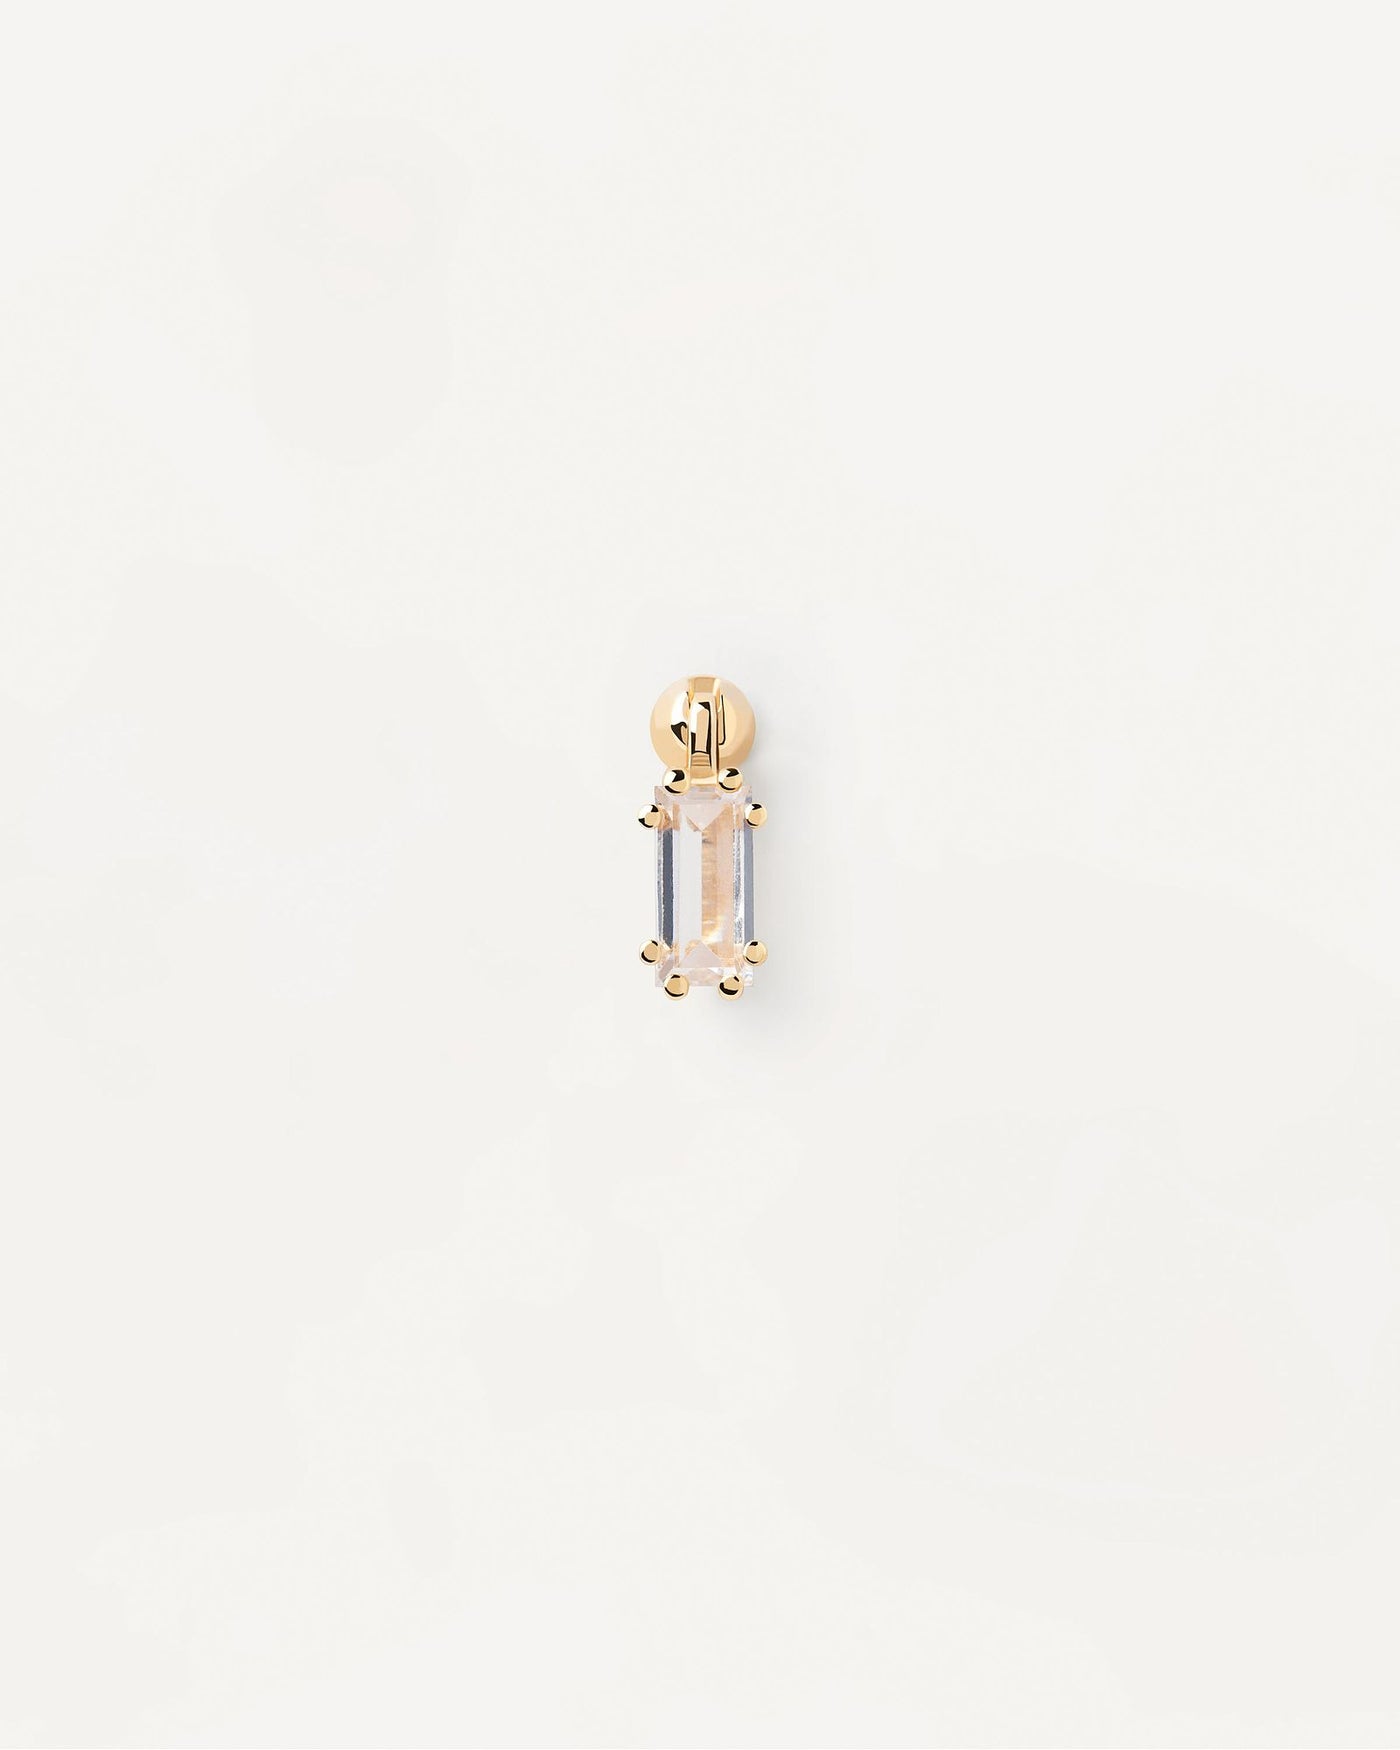 2024 Selection | Ali Single Earring. Gold-plated ear piercing with baguette cut white zirconia. Get the latest arrival from PDPAOLA. Place your order safely and get this Best Seller. Free Shipping.